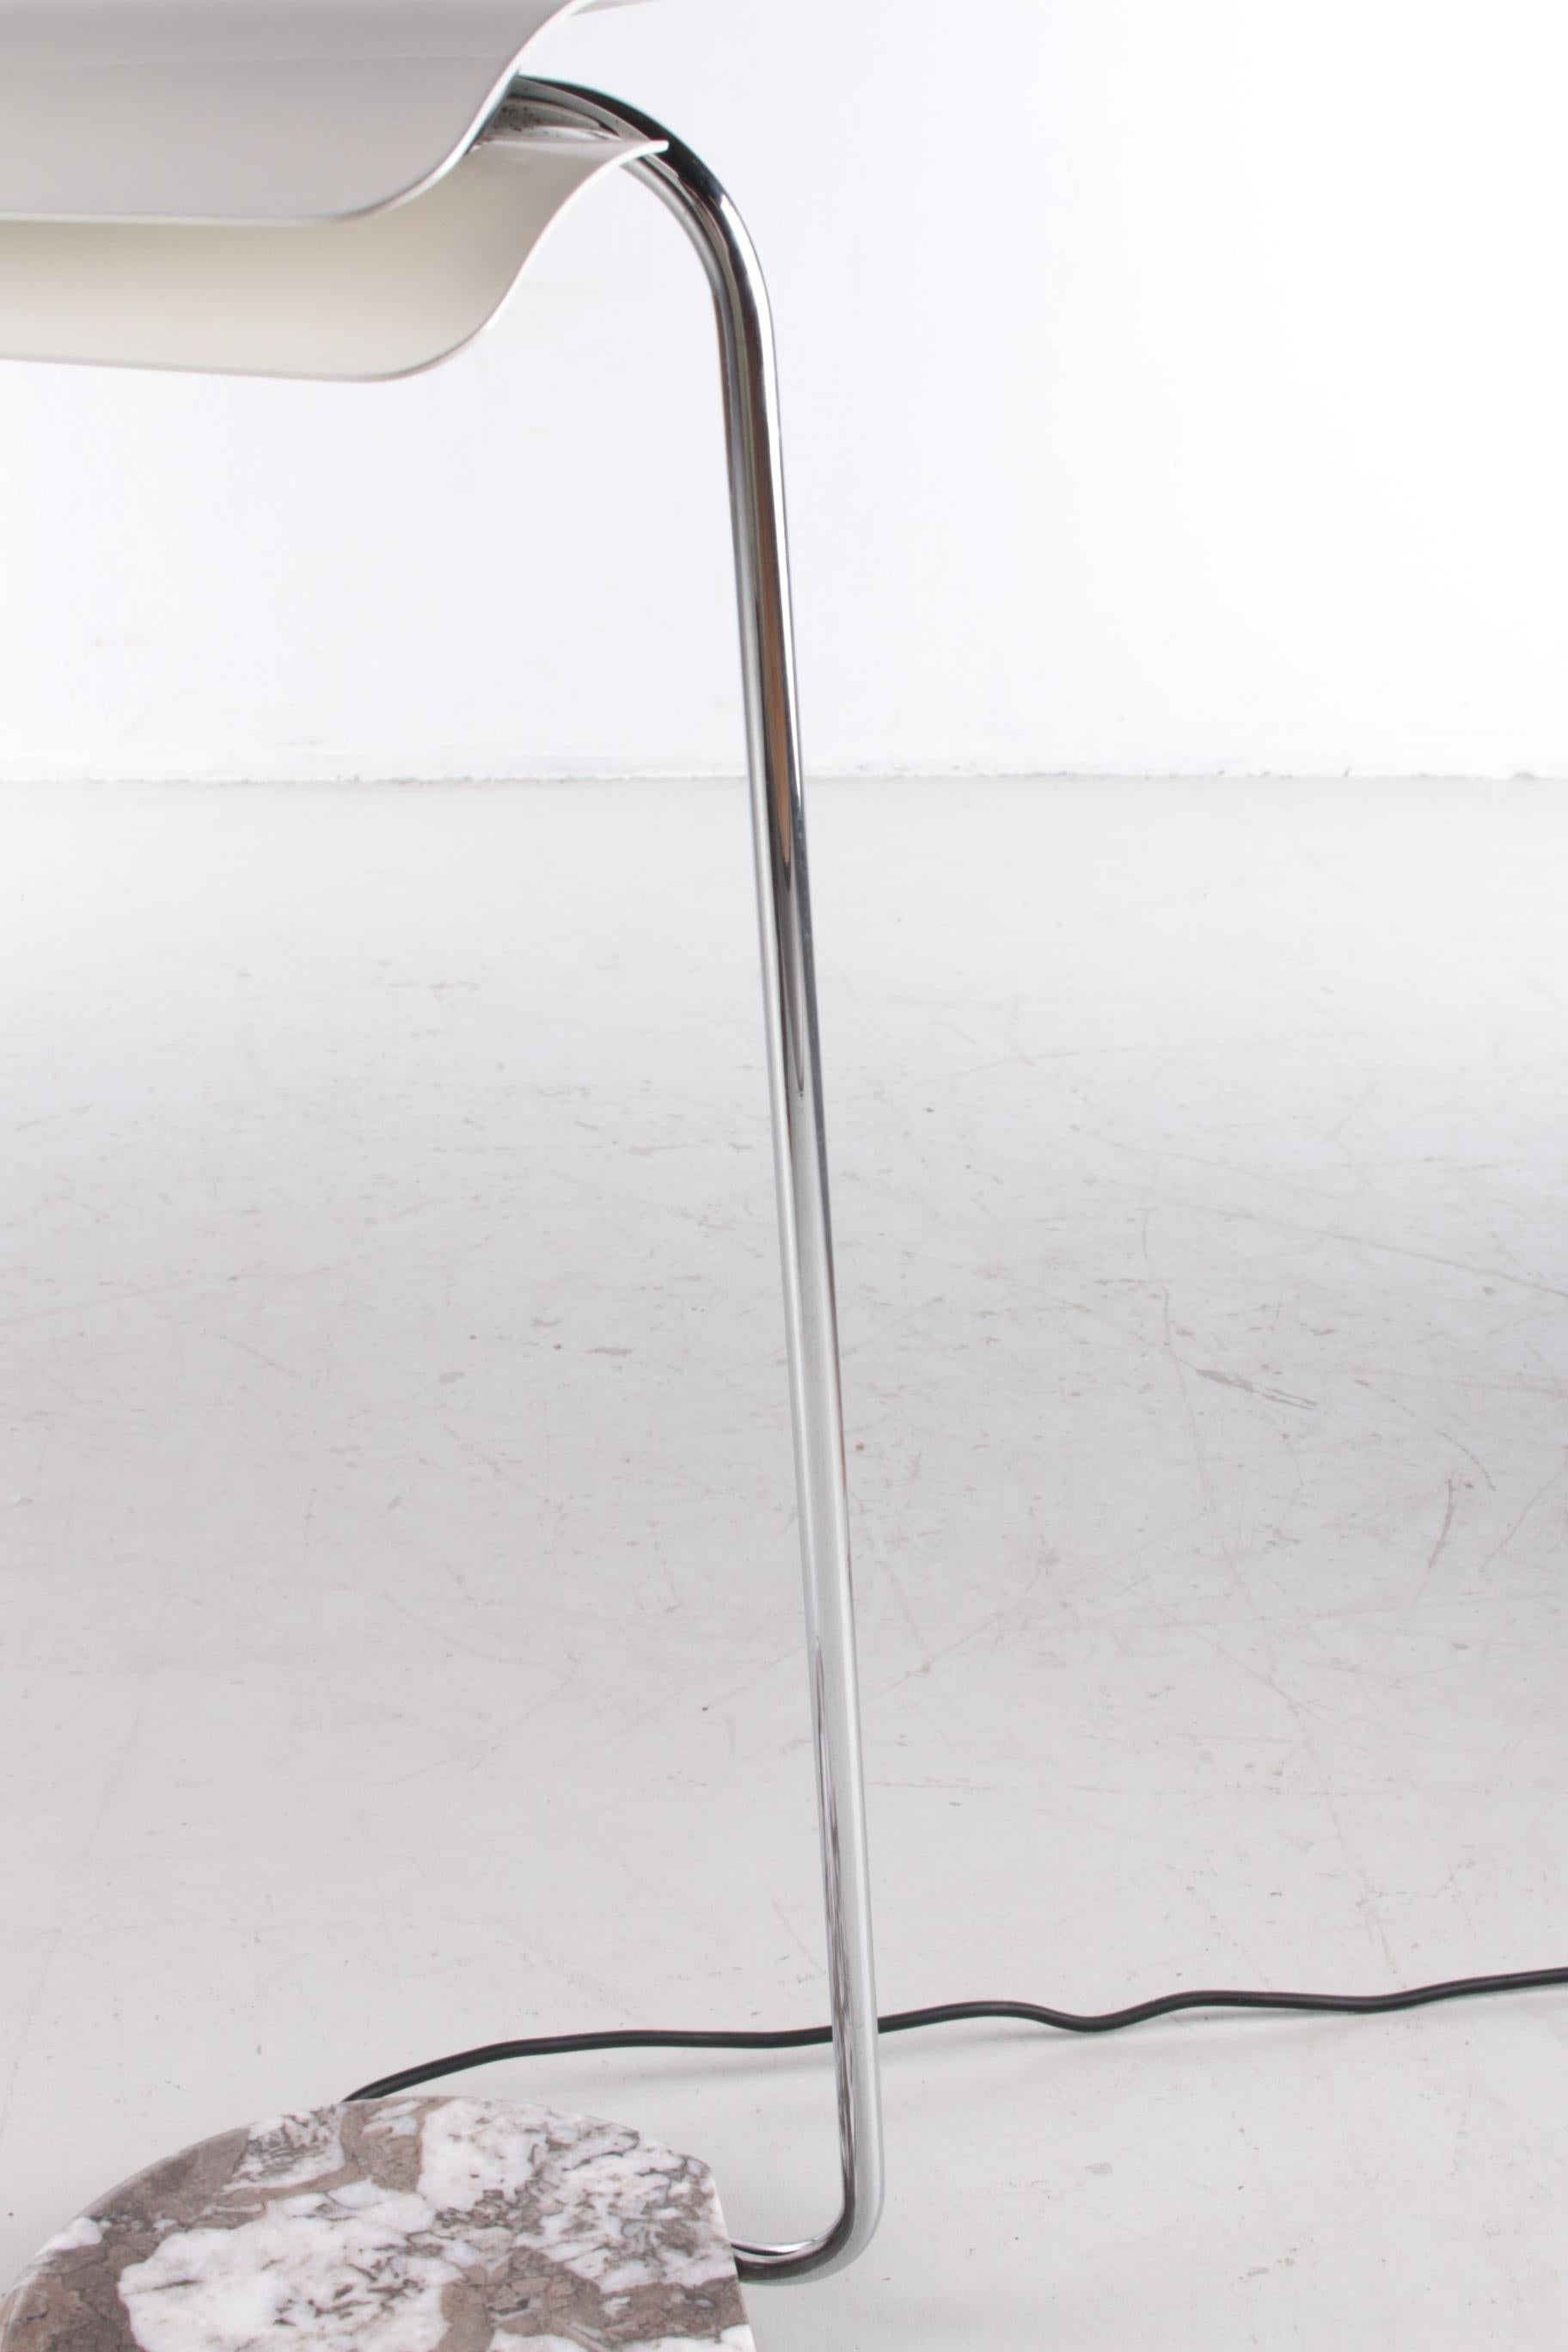 Metal Tegola Table Lamp by Bruno Gecchelin for Skipper and Pollux, 1970s For Sale